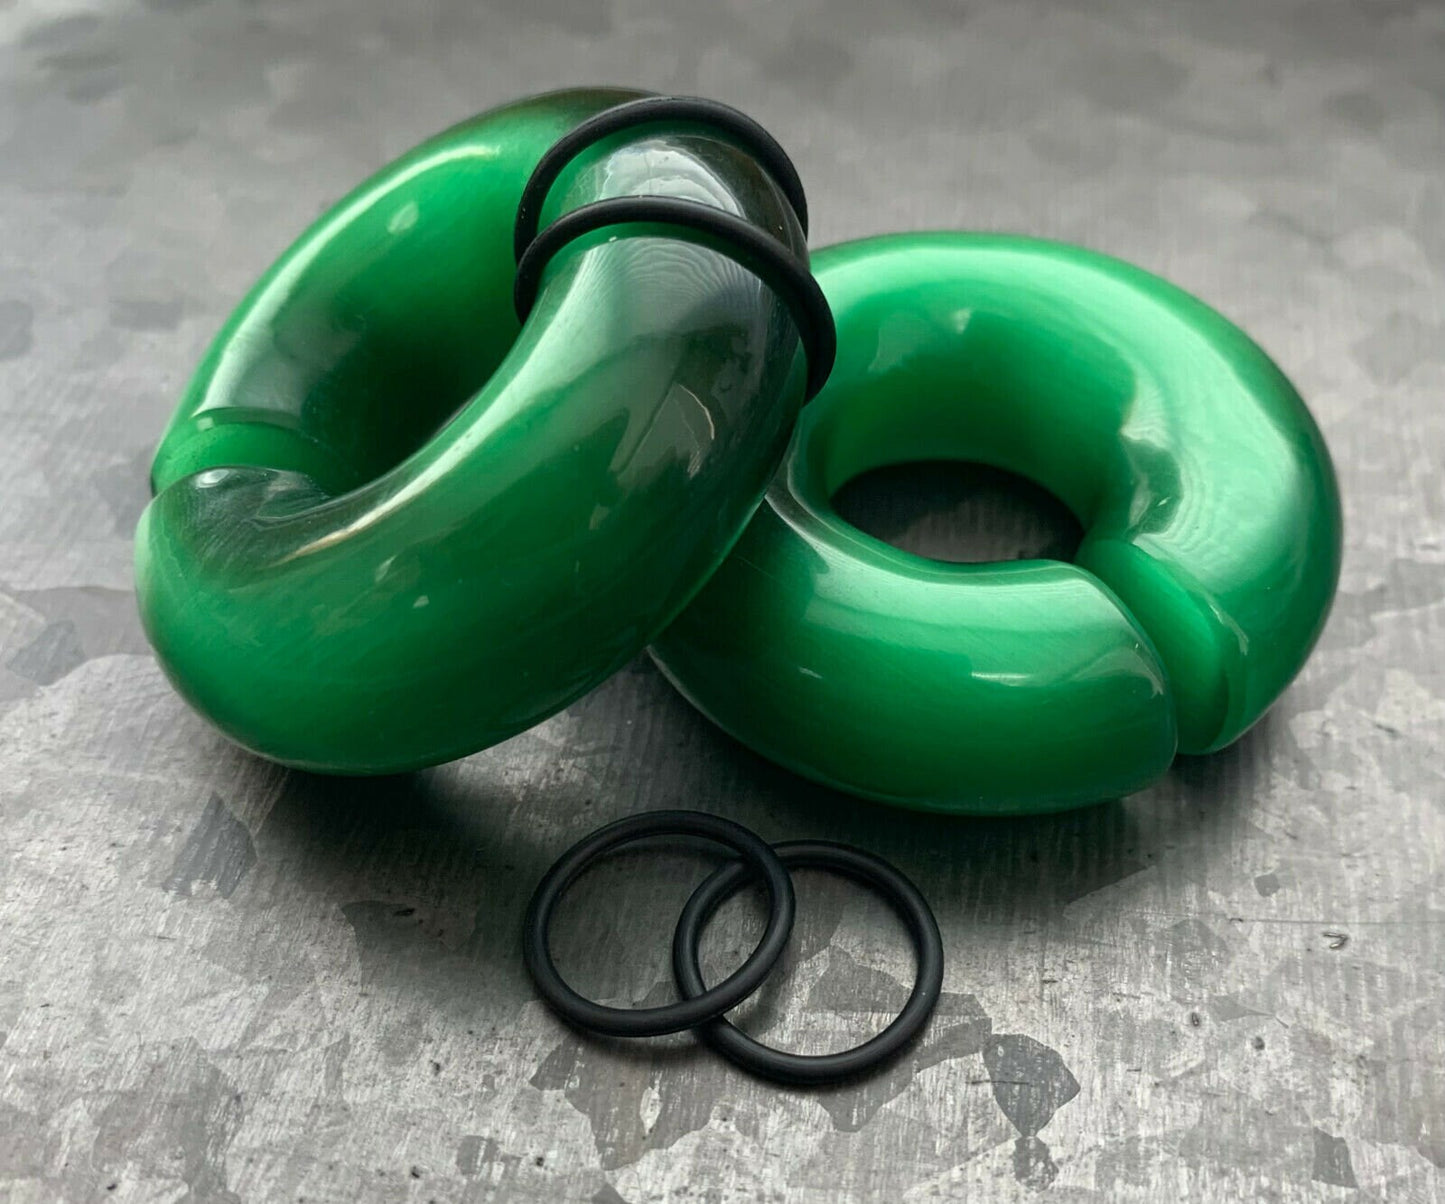 PAIR of Unique Deep Green Cat Eye Large Stone/Glass Hoops Ear Weight Hanging Plugs & O-rings - Gauges 4g (5mm) up to 5/8" (16mm) available!